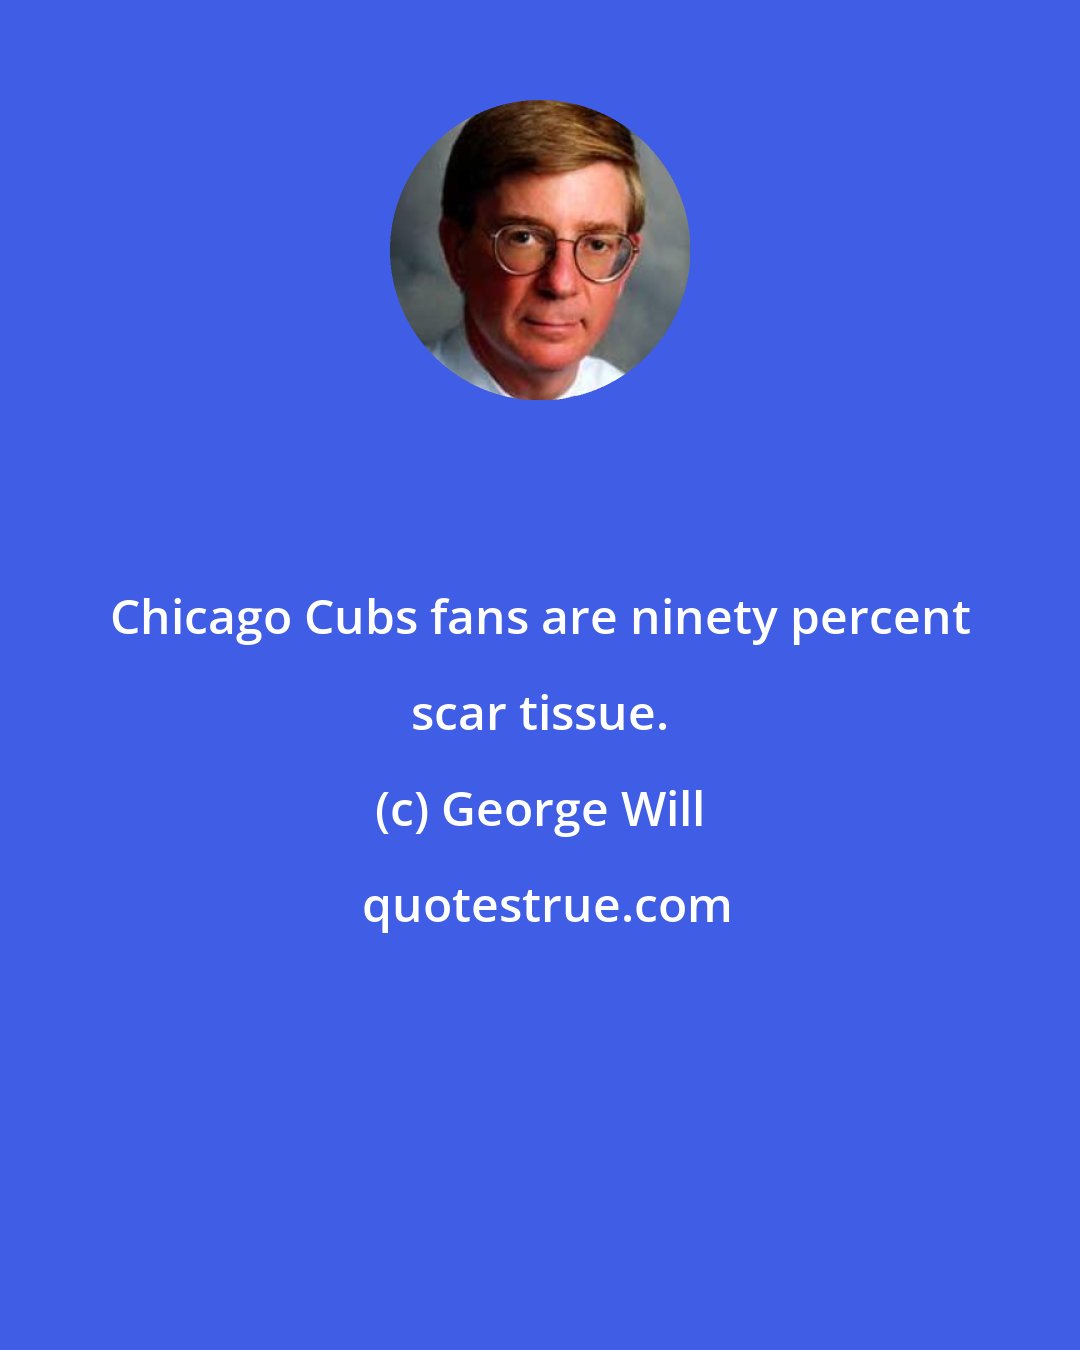 George Will: Chicago Cubs fans are ninety percent scar tissue.